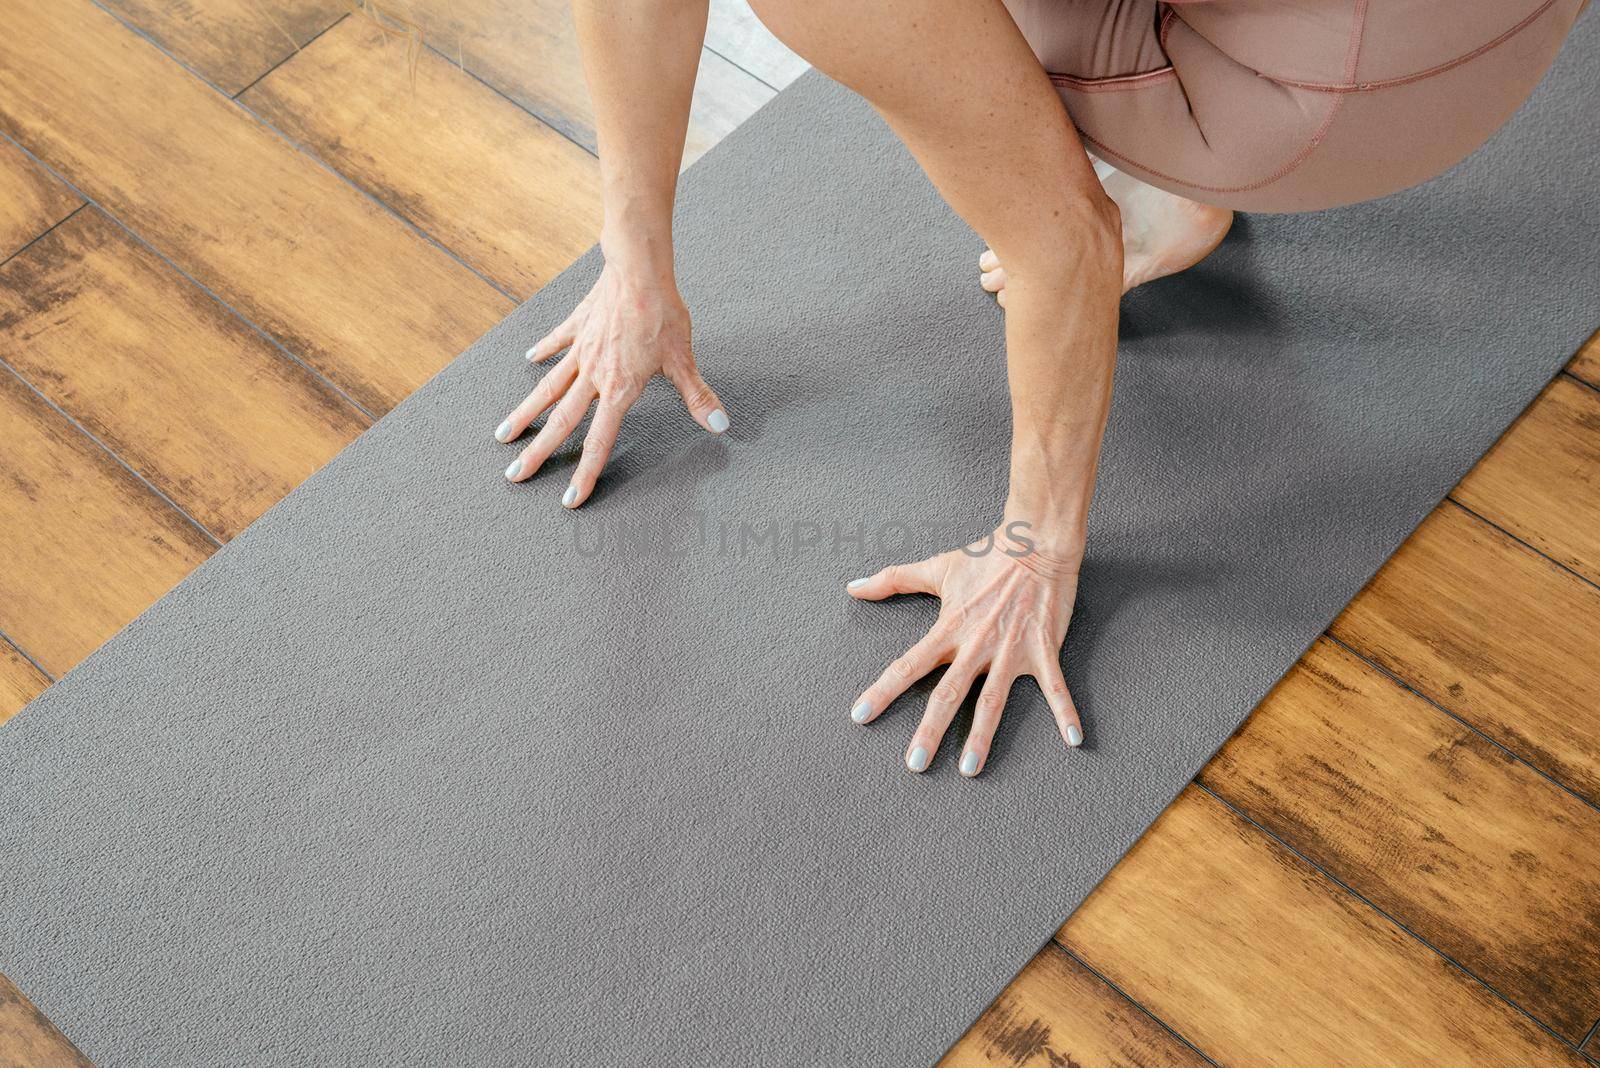 Cropped view of mature woman doing yoga or pilates on a mat in yoga studio